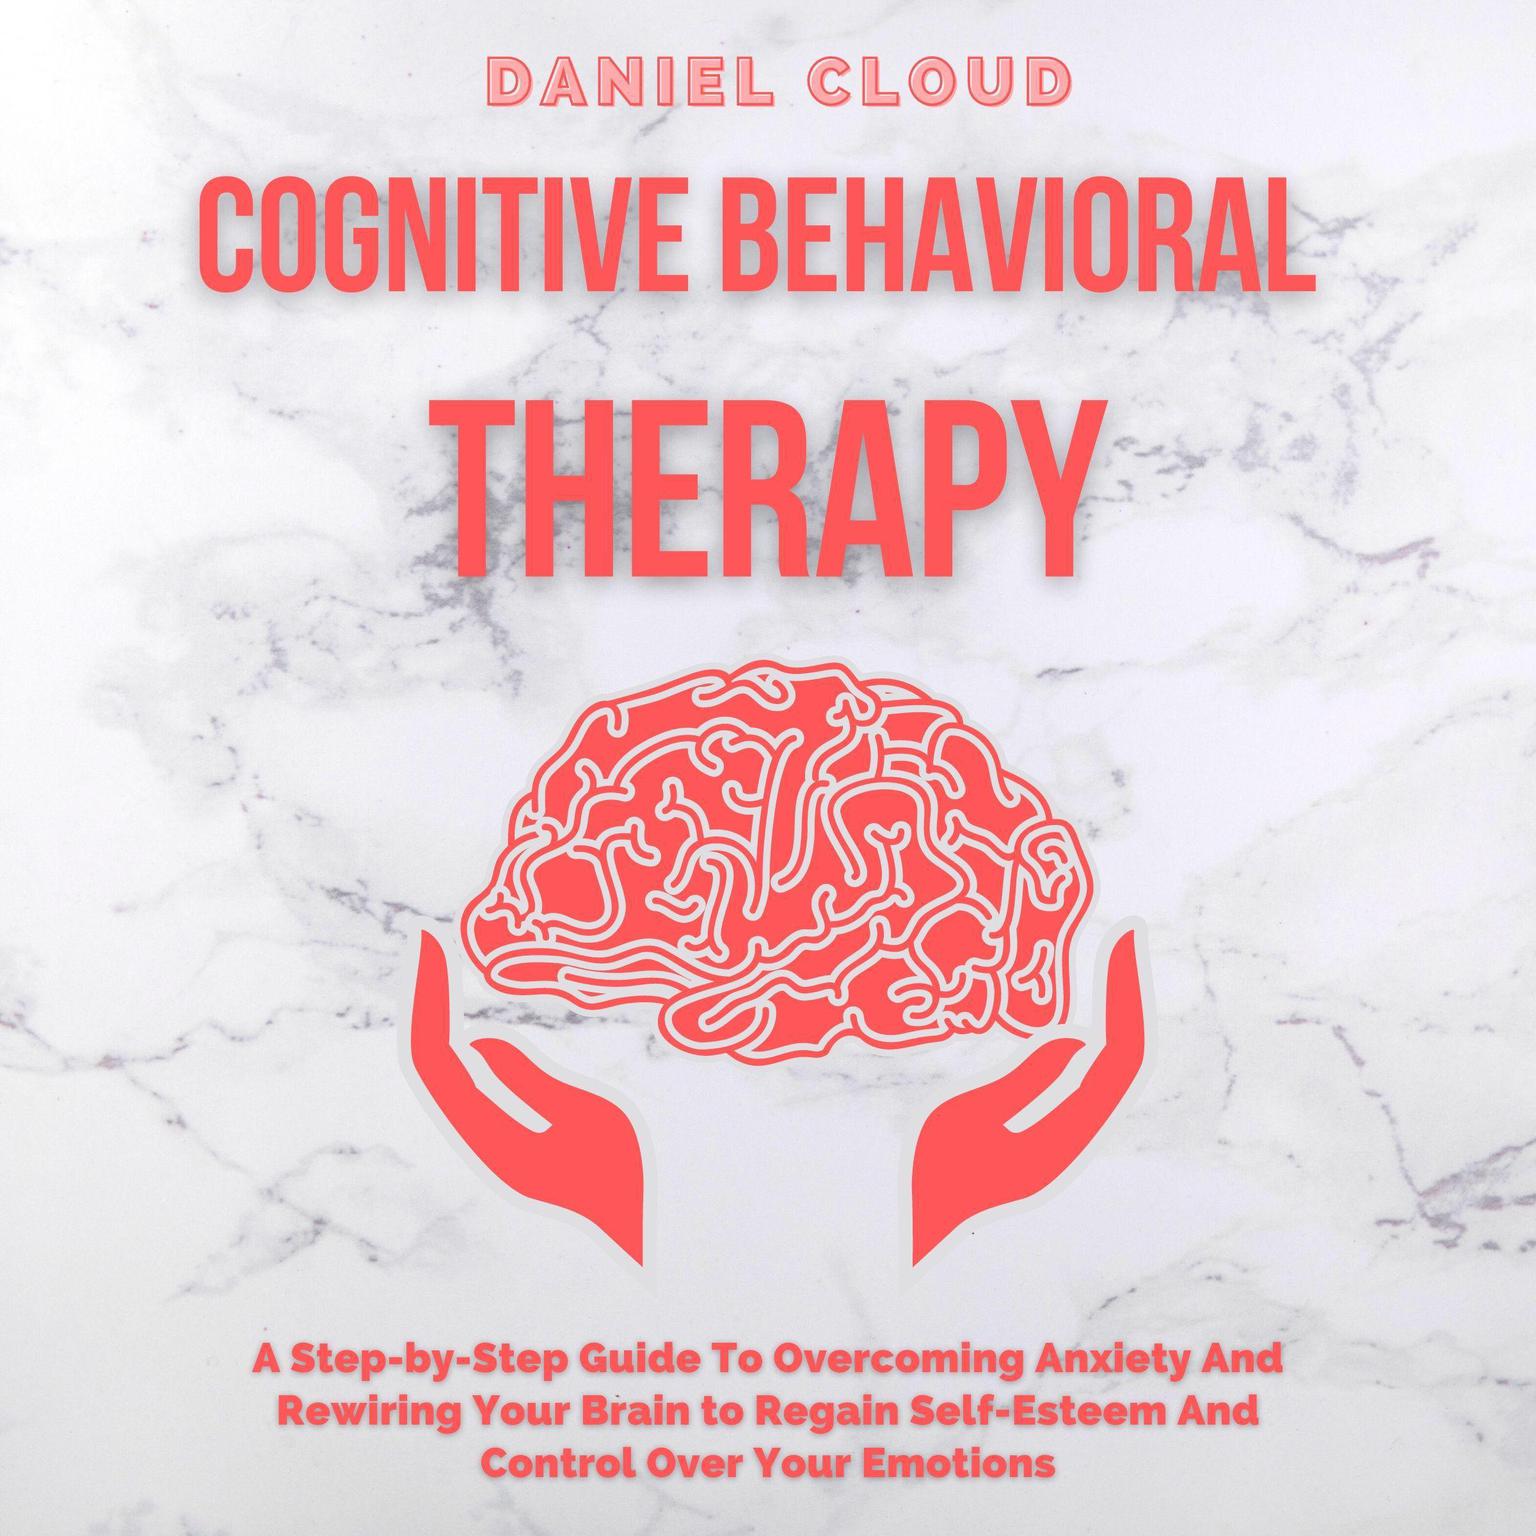 Cognitive Behavioral Therapy: : A Step-by-Step Guide to Overcoming Anxiety and Rewiring Your Brain to Regain Self-Esteem and Control Over Your Emotions Audiobook, by Daniel Cloud